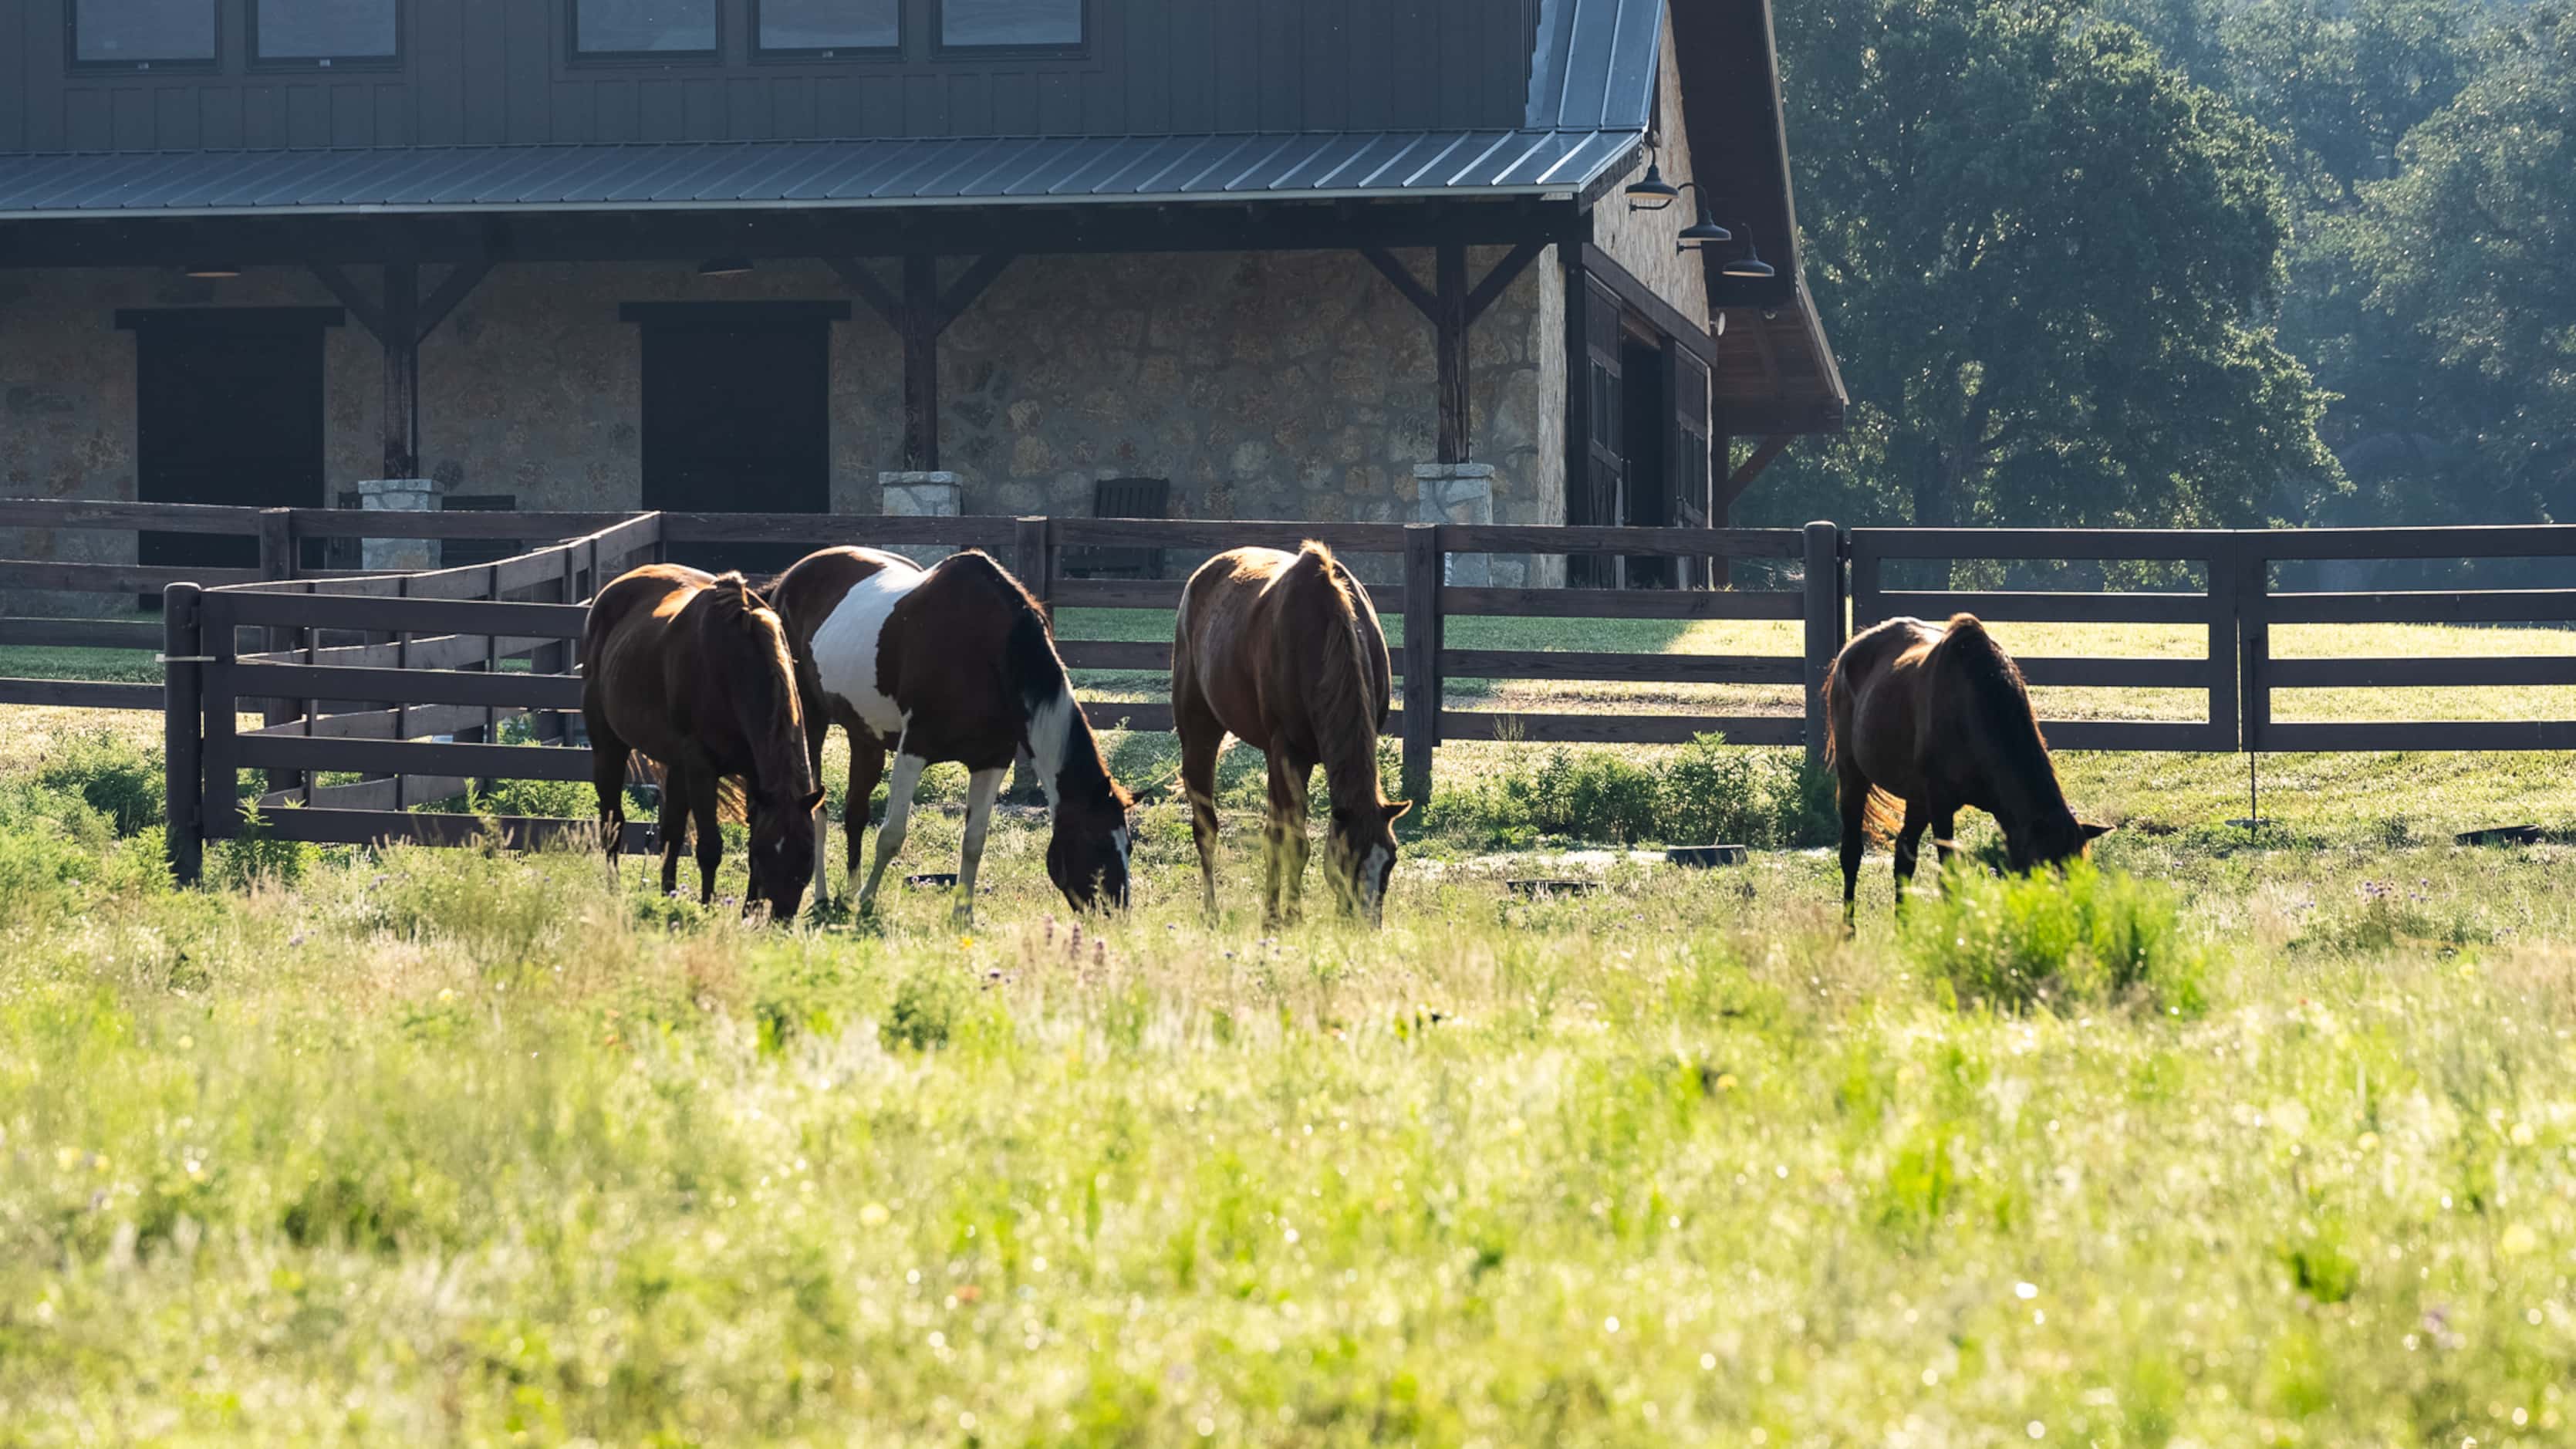 Beyond facilities for horses, wildlife - from whitetail deer to quail - is abundant at the...